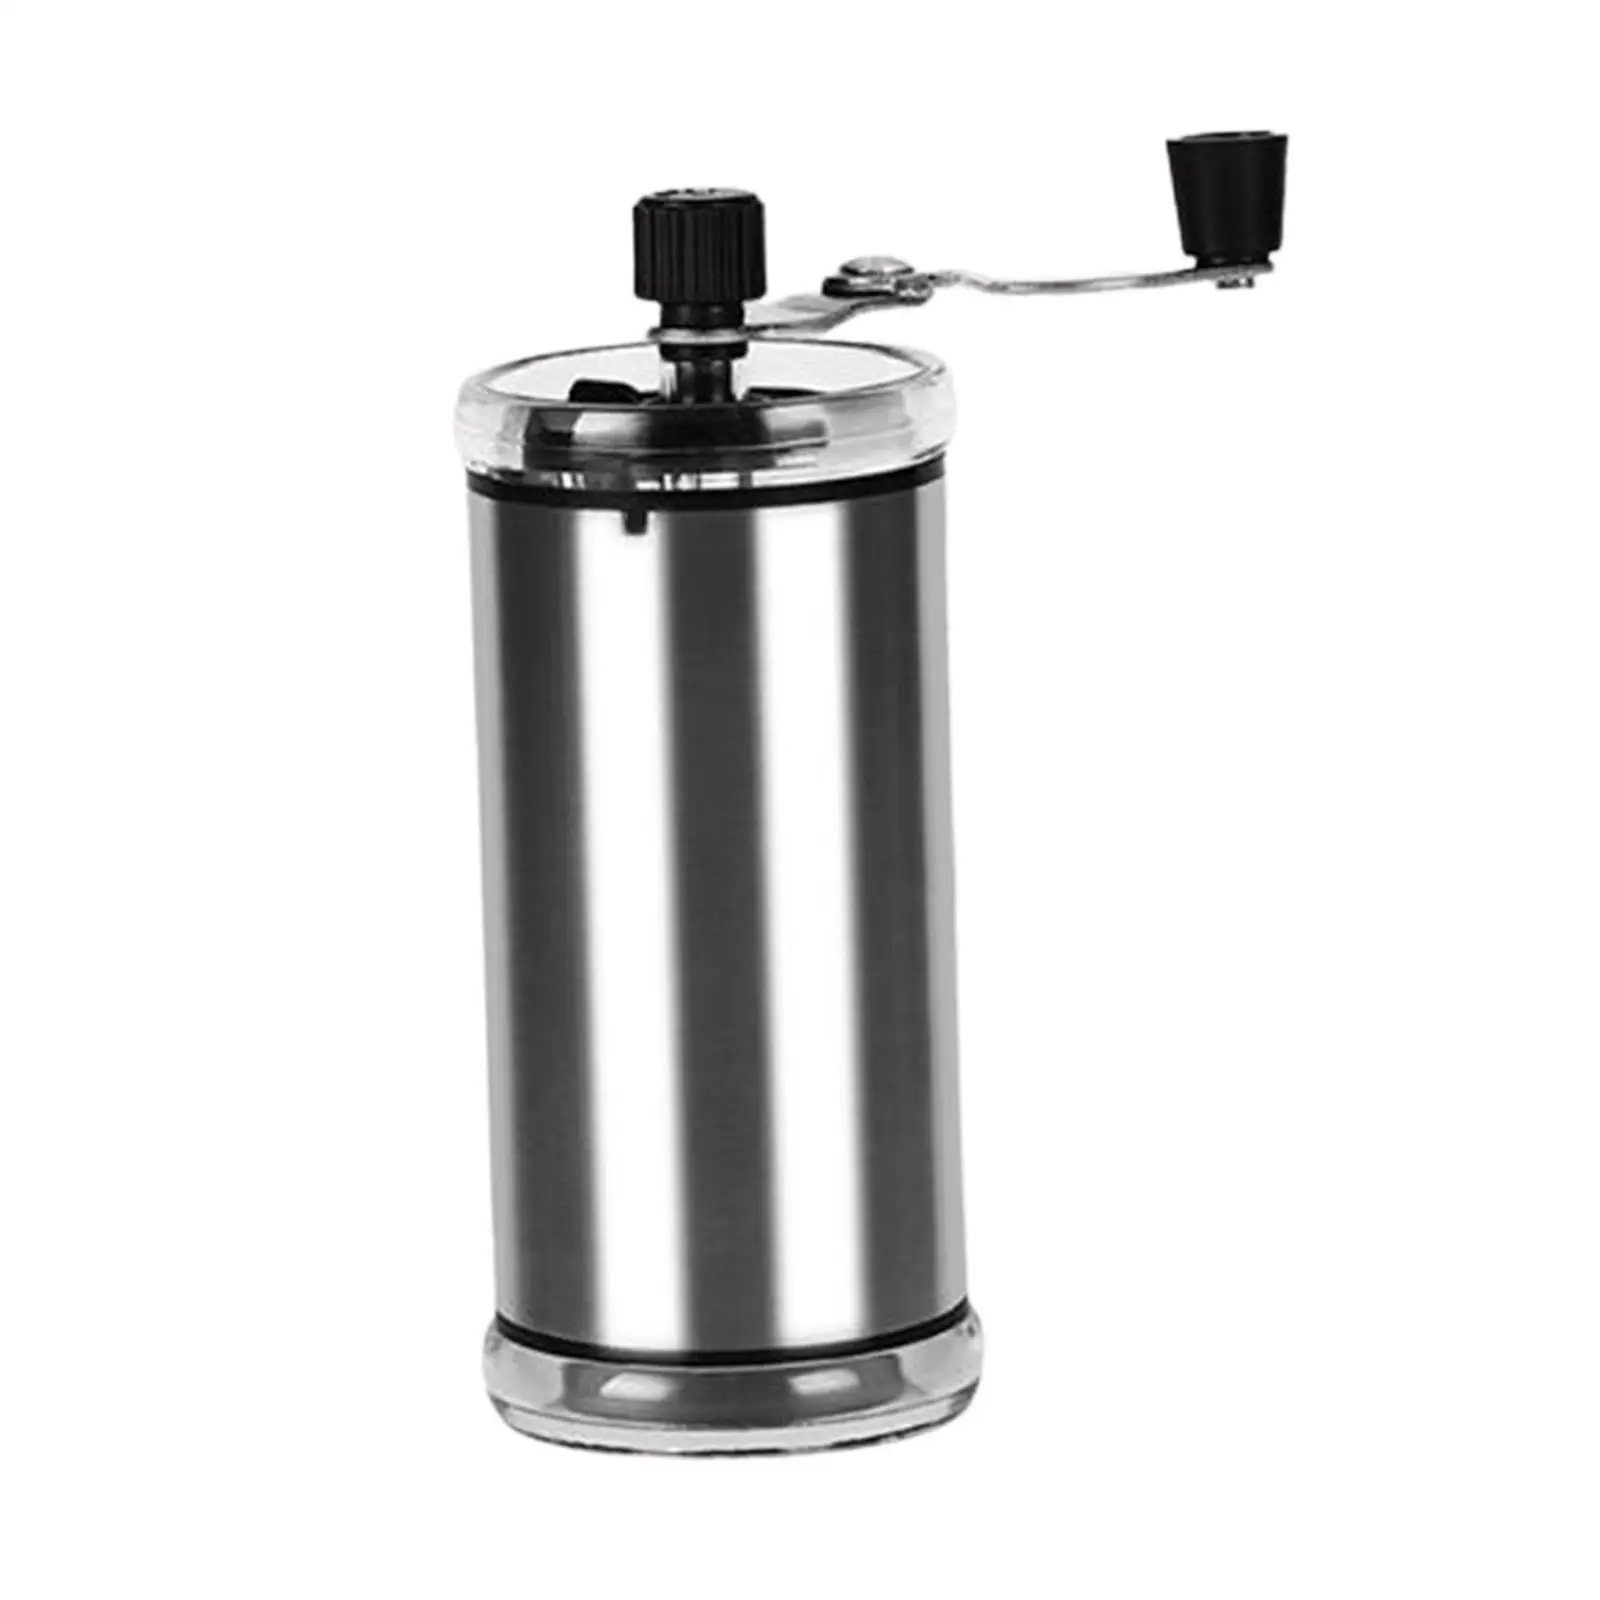 Mini Hand Coffee Grinder Stainless Steel Handheld Coffee Lover Gift Ceramics Burr Portable for Camping Travel Picnic Travel